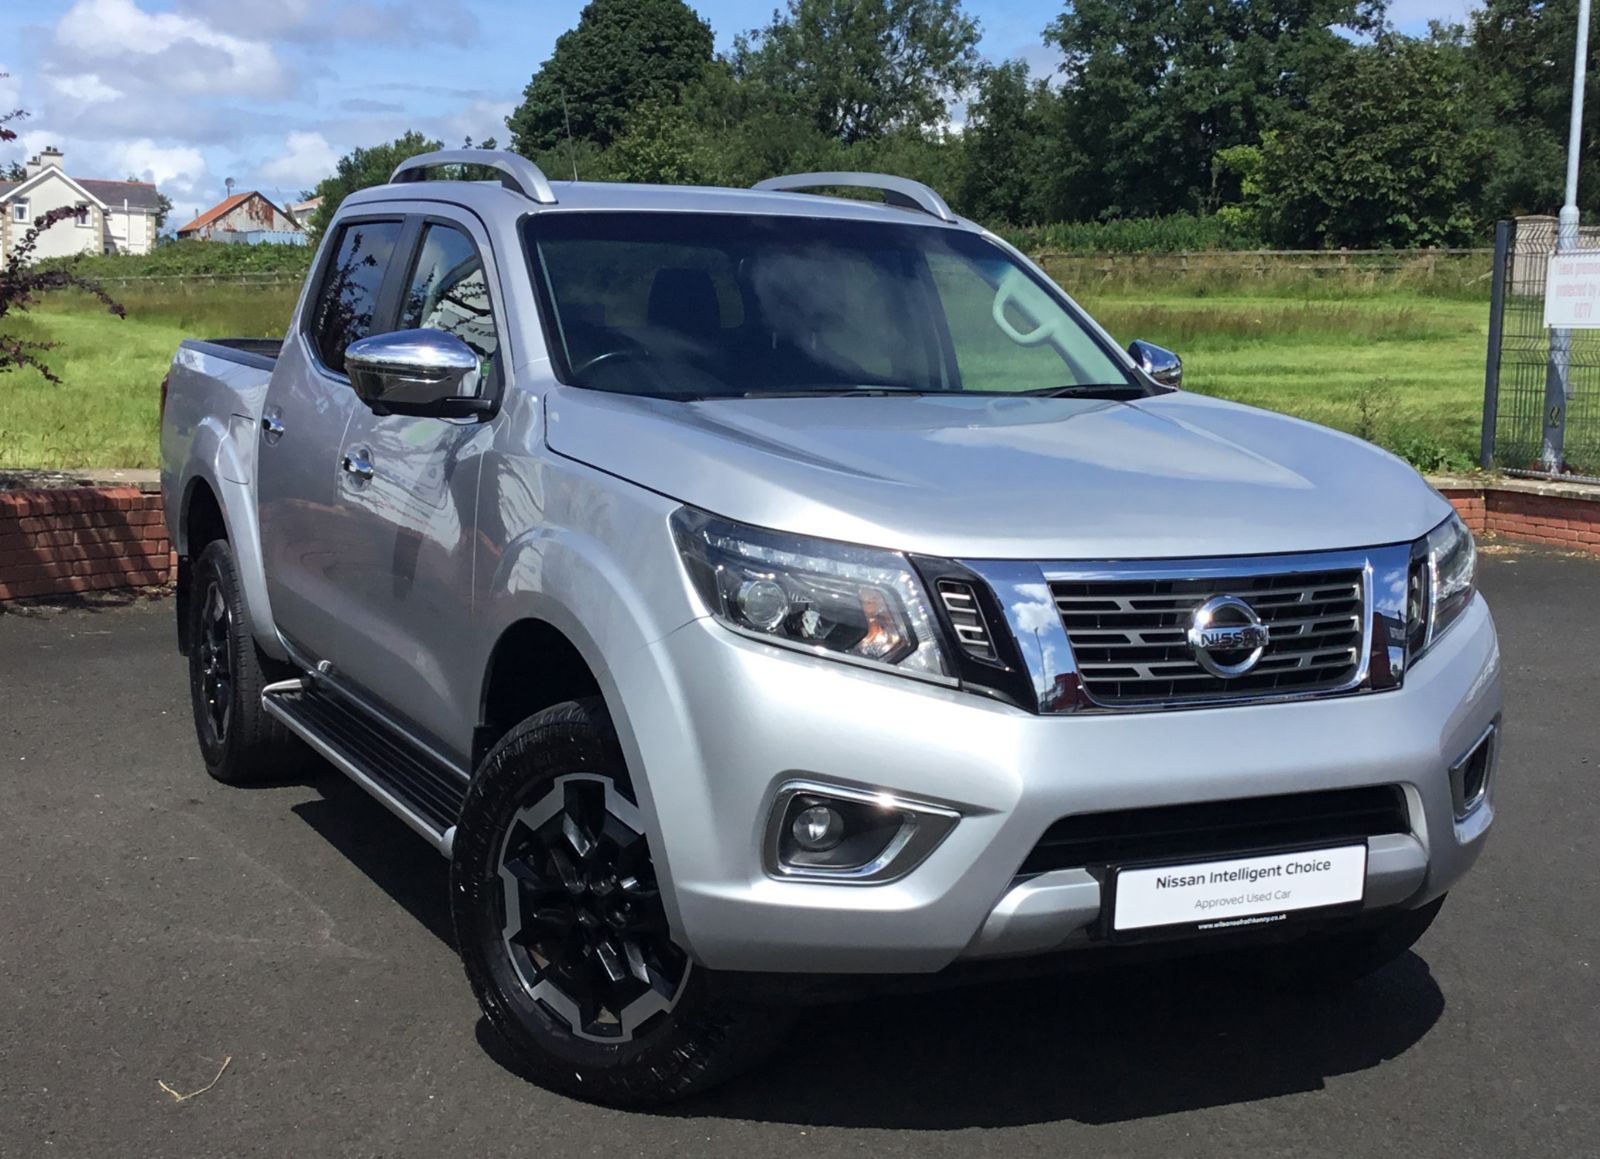 Nissan NAVARA TEKNA DCI AUTO* ONE OWNER WITH FULL SERVICE HISTORY